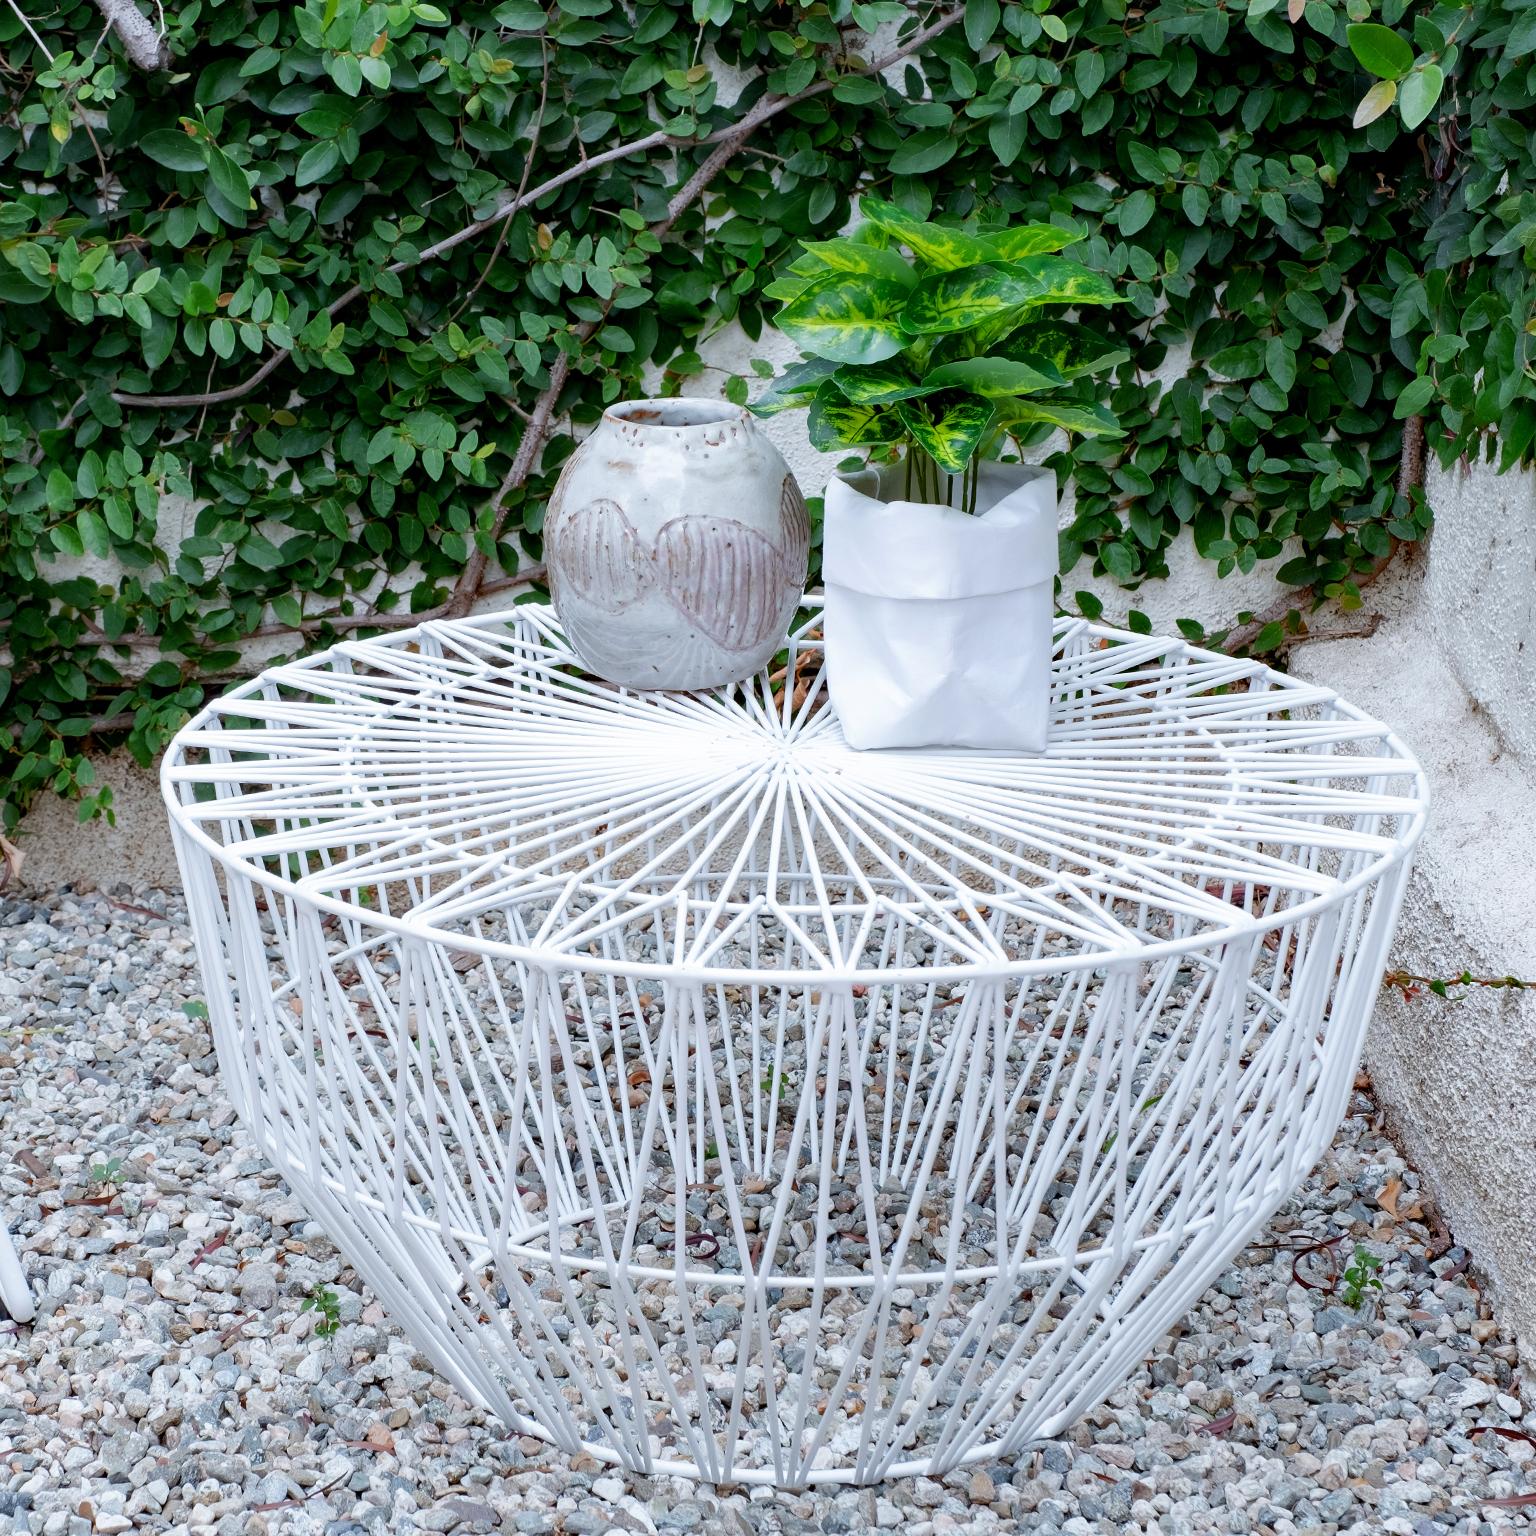 Bend Goods Wire Furniture
The Drum table is a multifunctional wire table or ottoman with an intricate wire pattern and a lightweight round design. This fun versatile piece enhances any indoor or outdoor space. Try a bold color option to brighten a